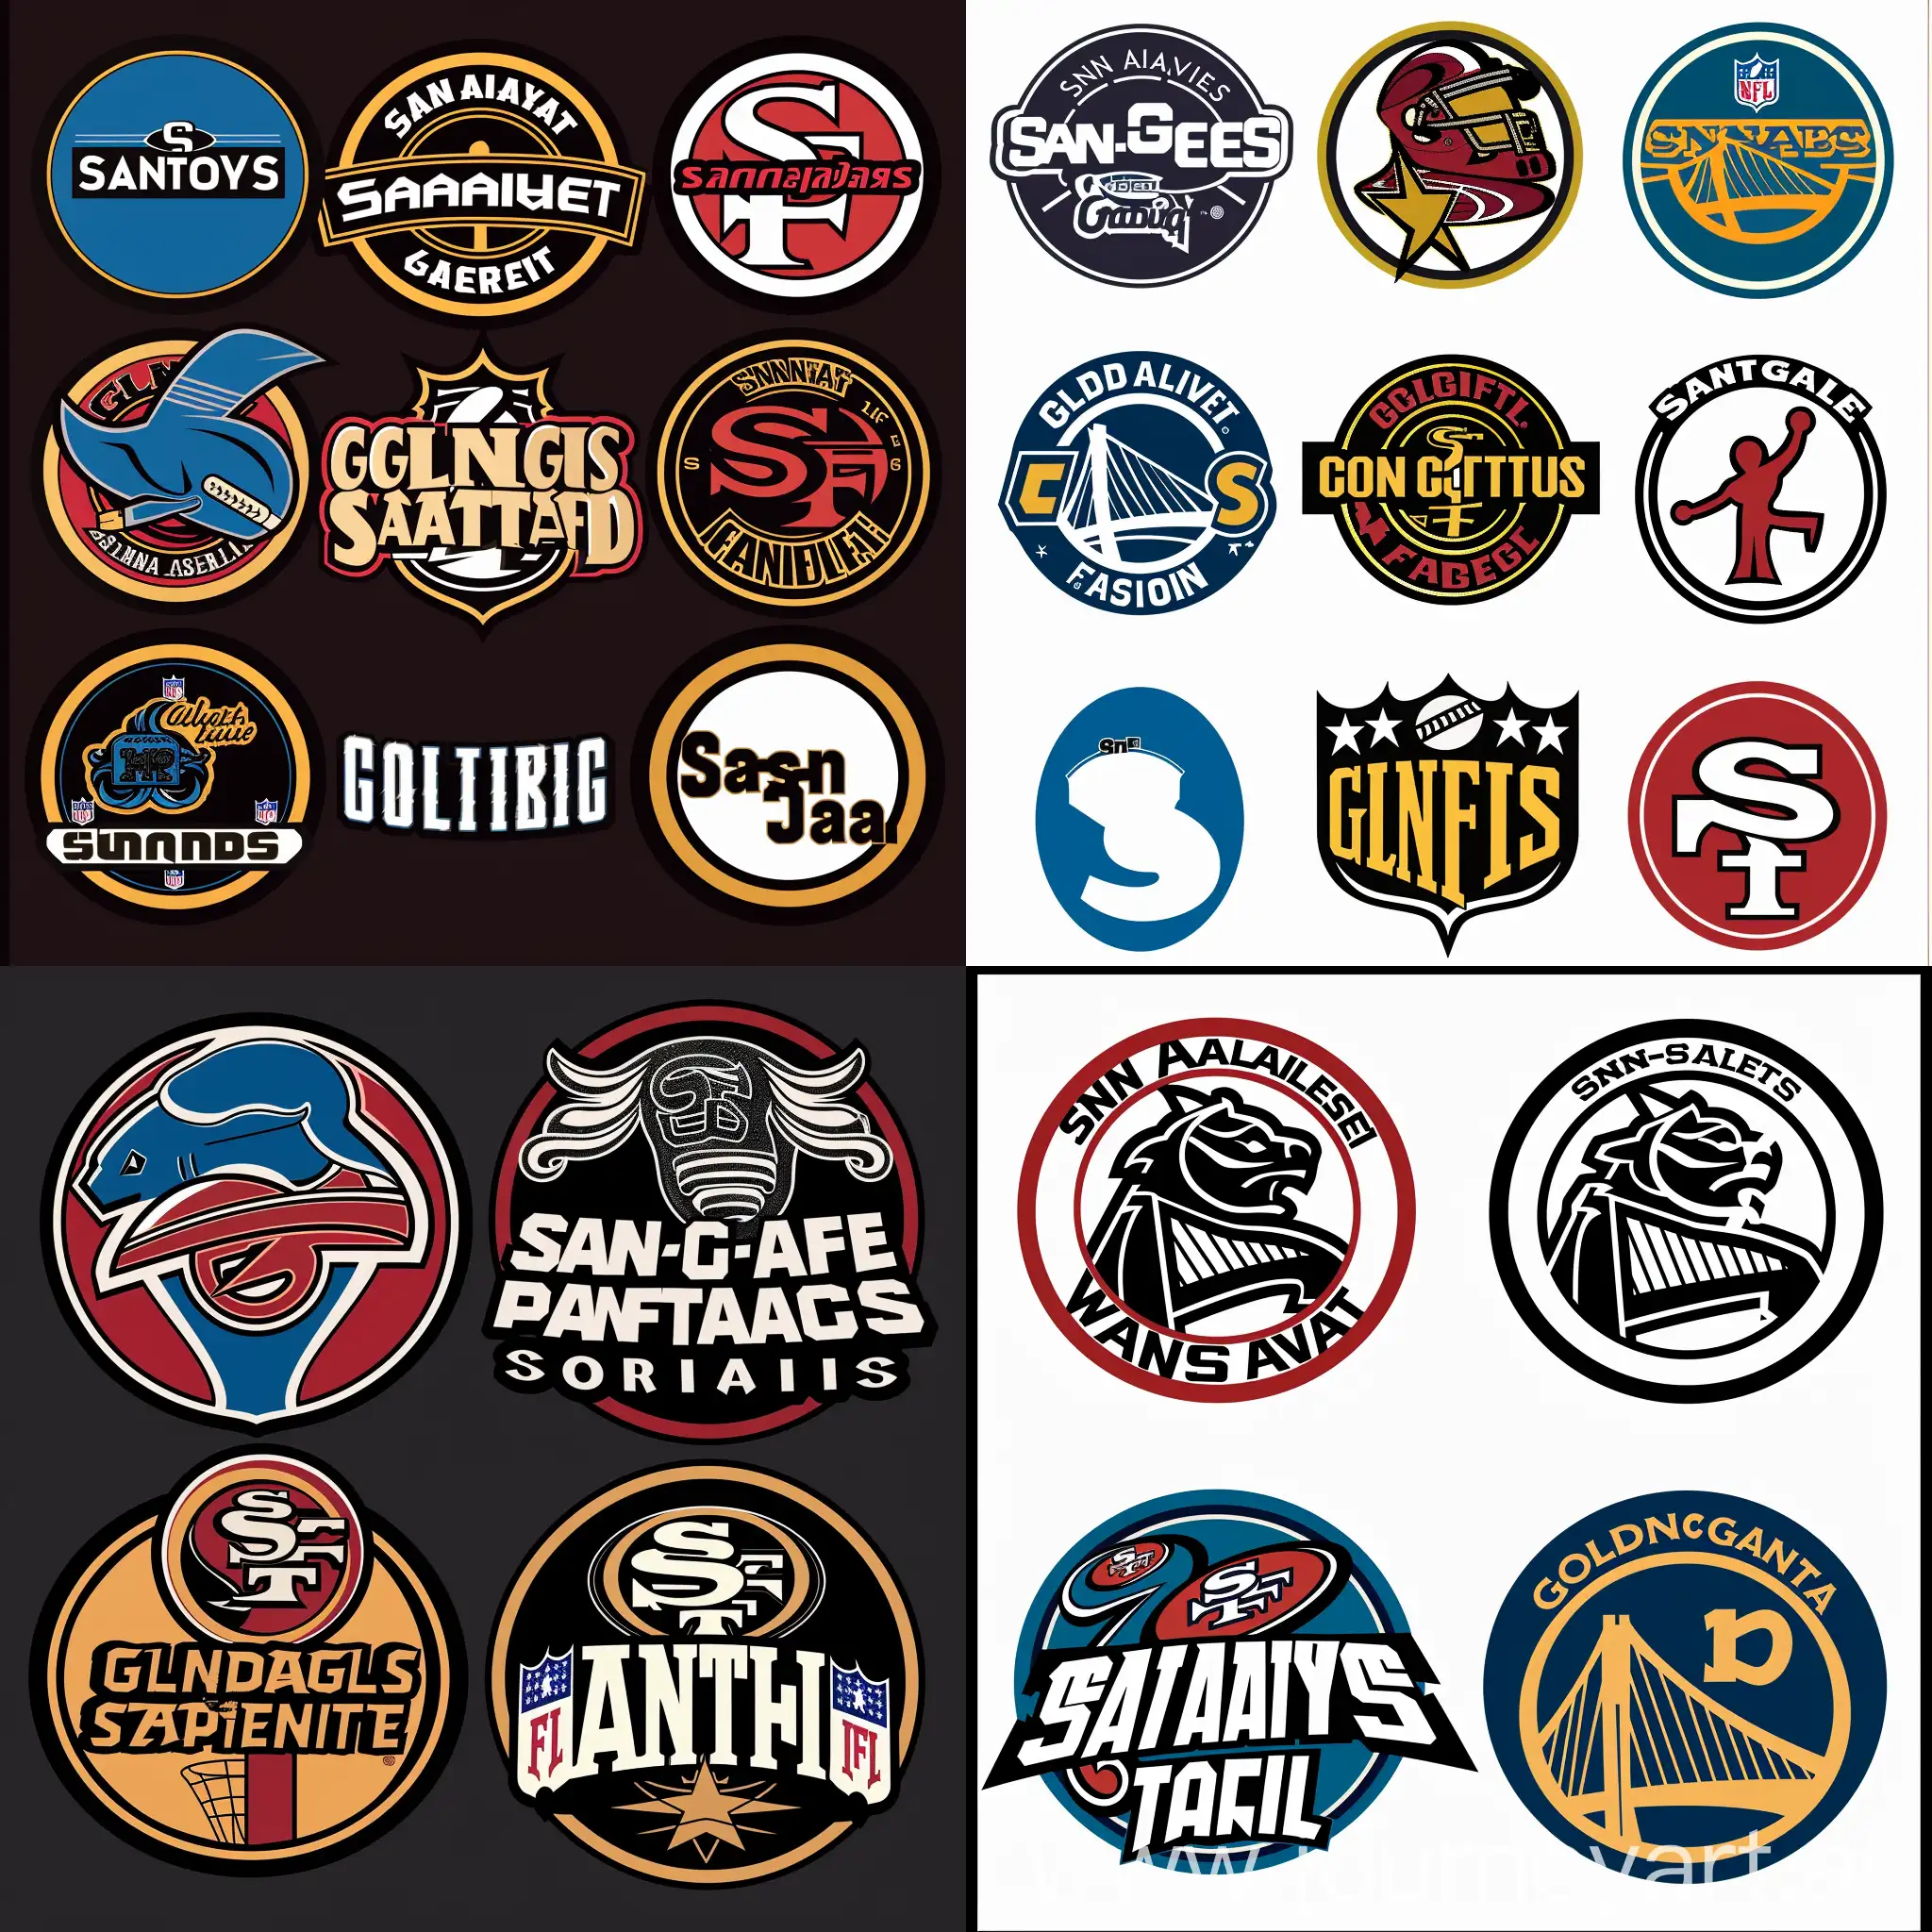 Bay area sports logo please make references to the following teams and ensure all teams are included in each logo: San Jose Sharks Golden State Warriors San Francisco 49ers